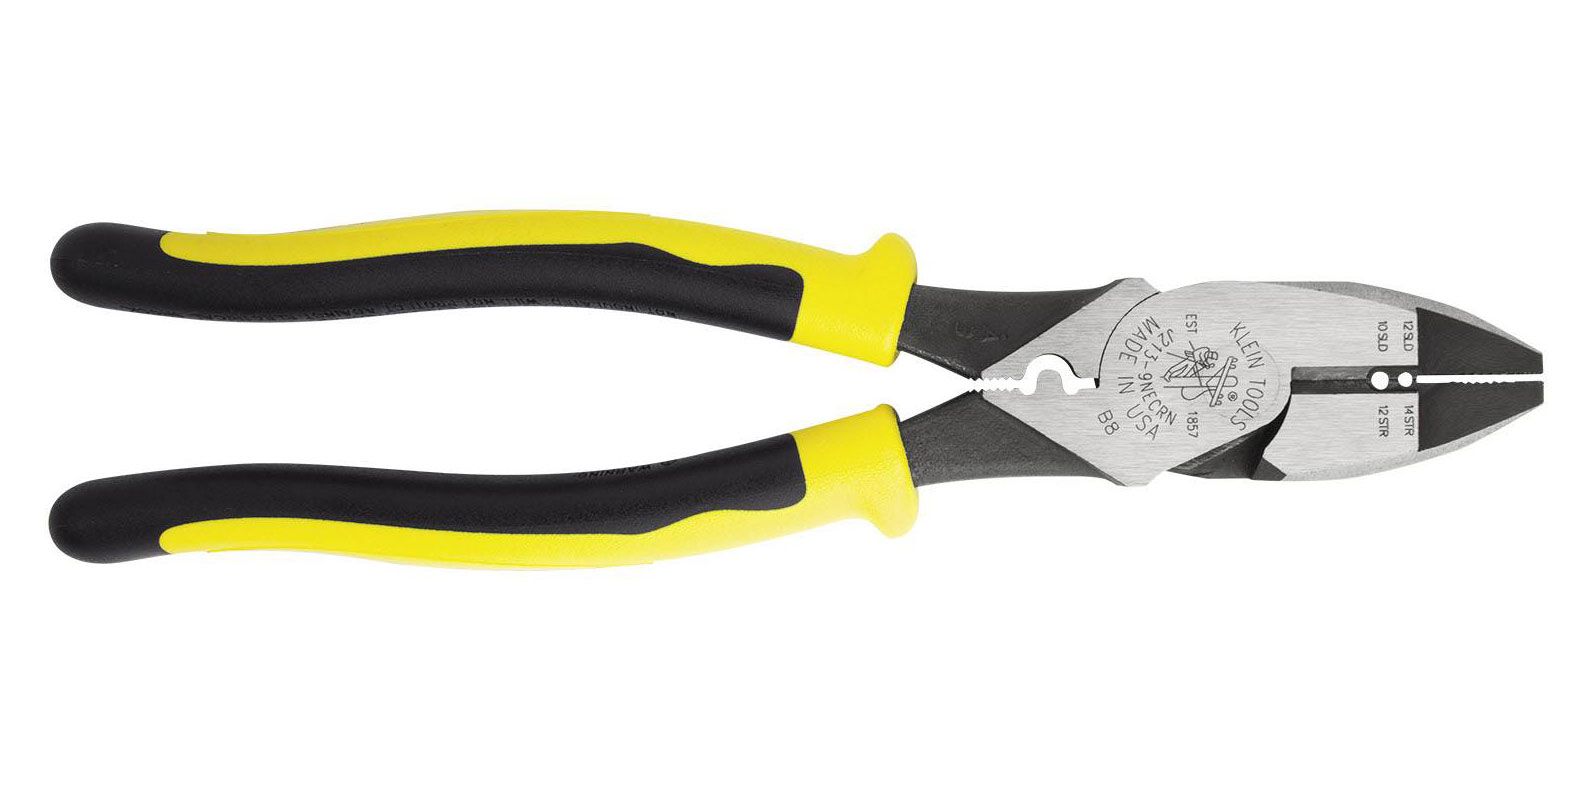 How Are a Pair of Pliers Made? Watch How Klein Tools Does It